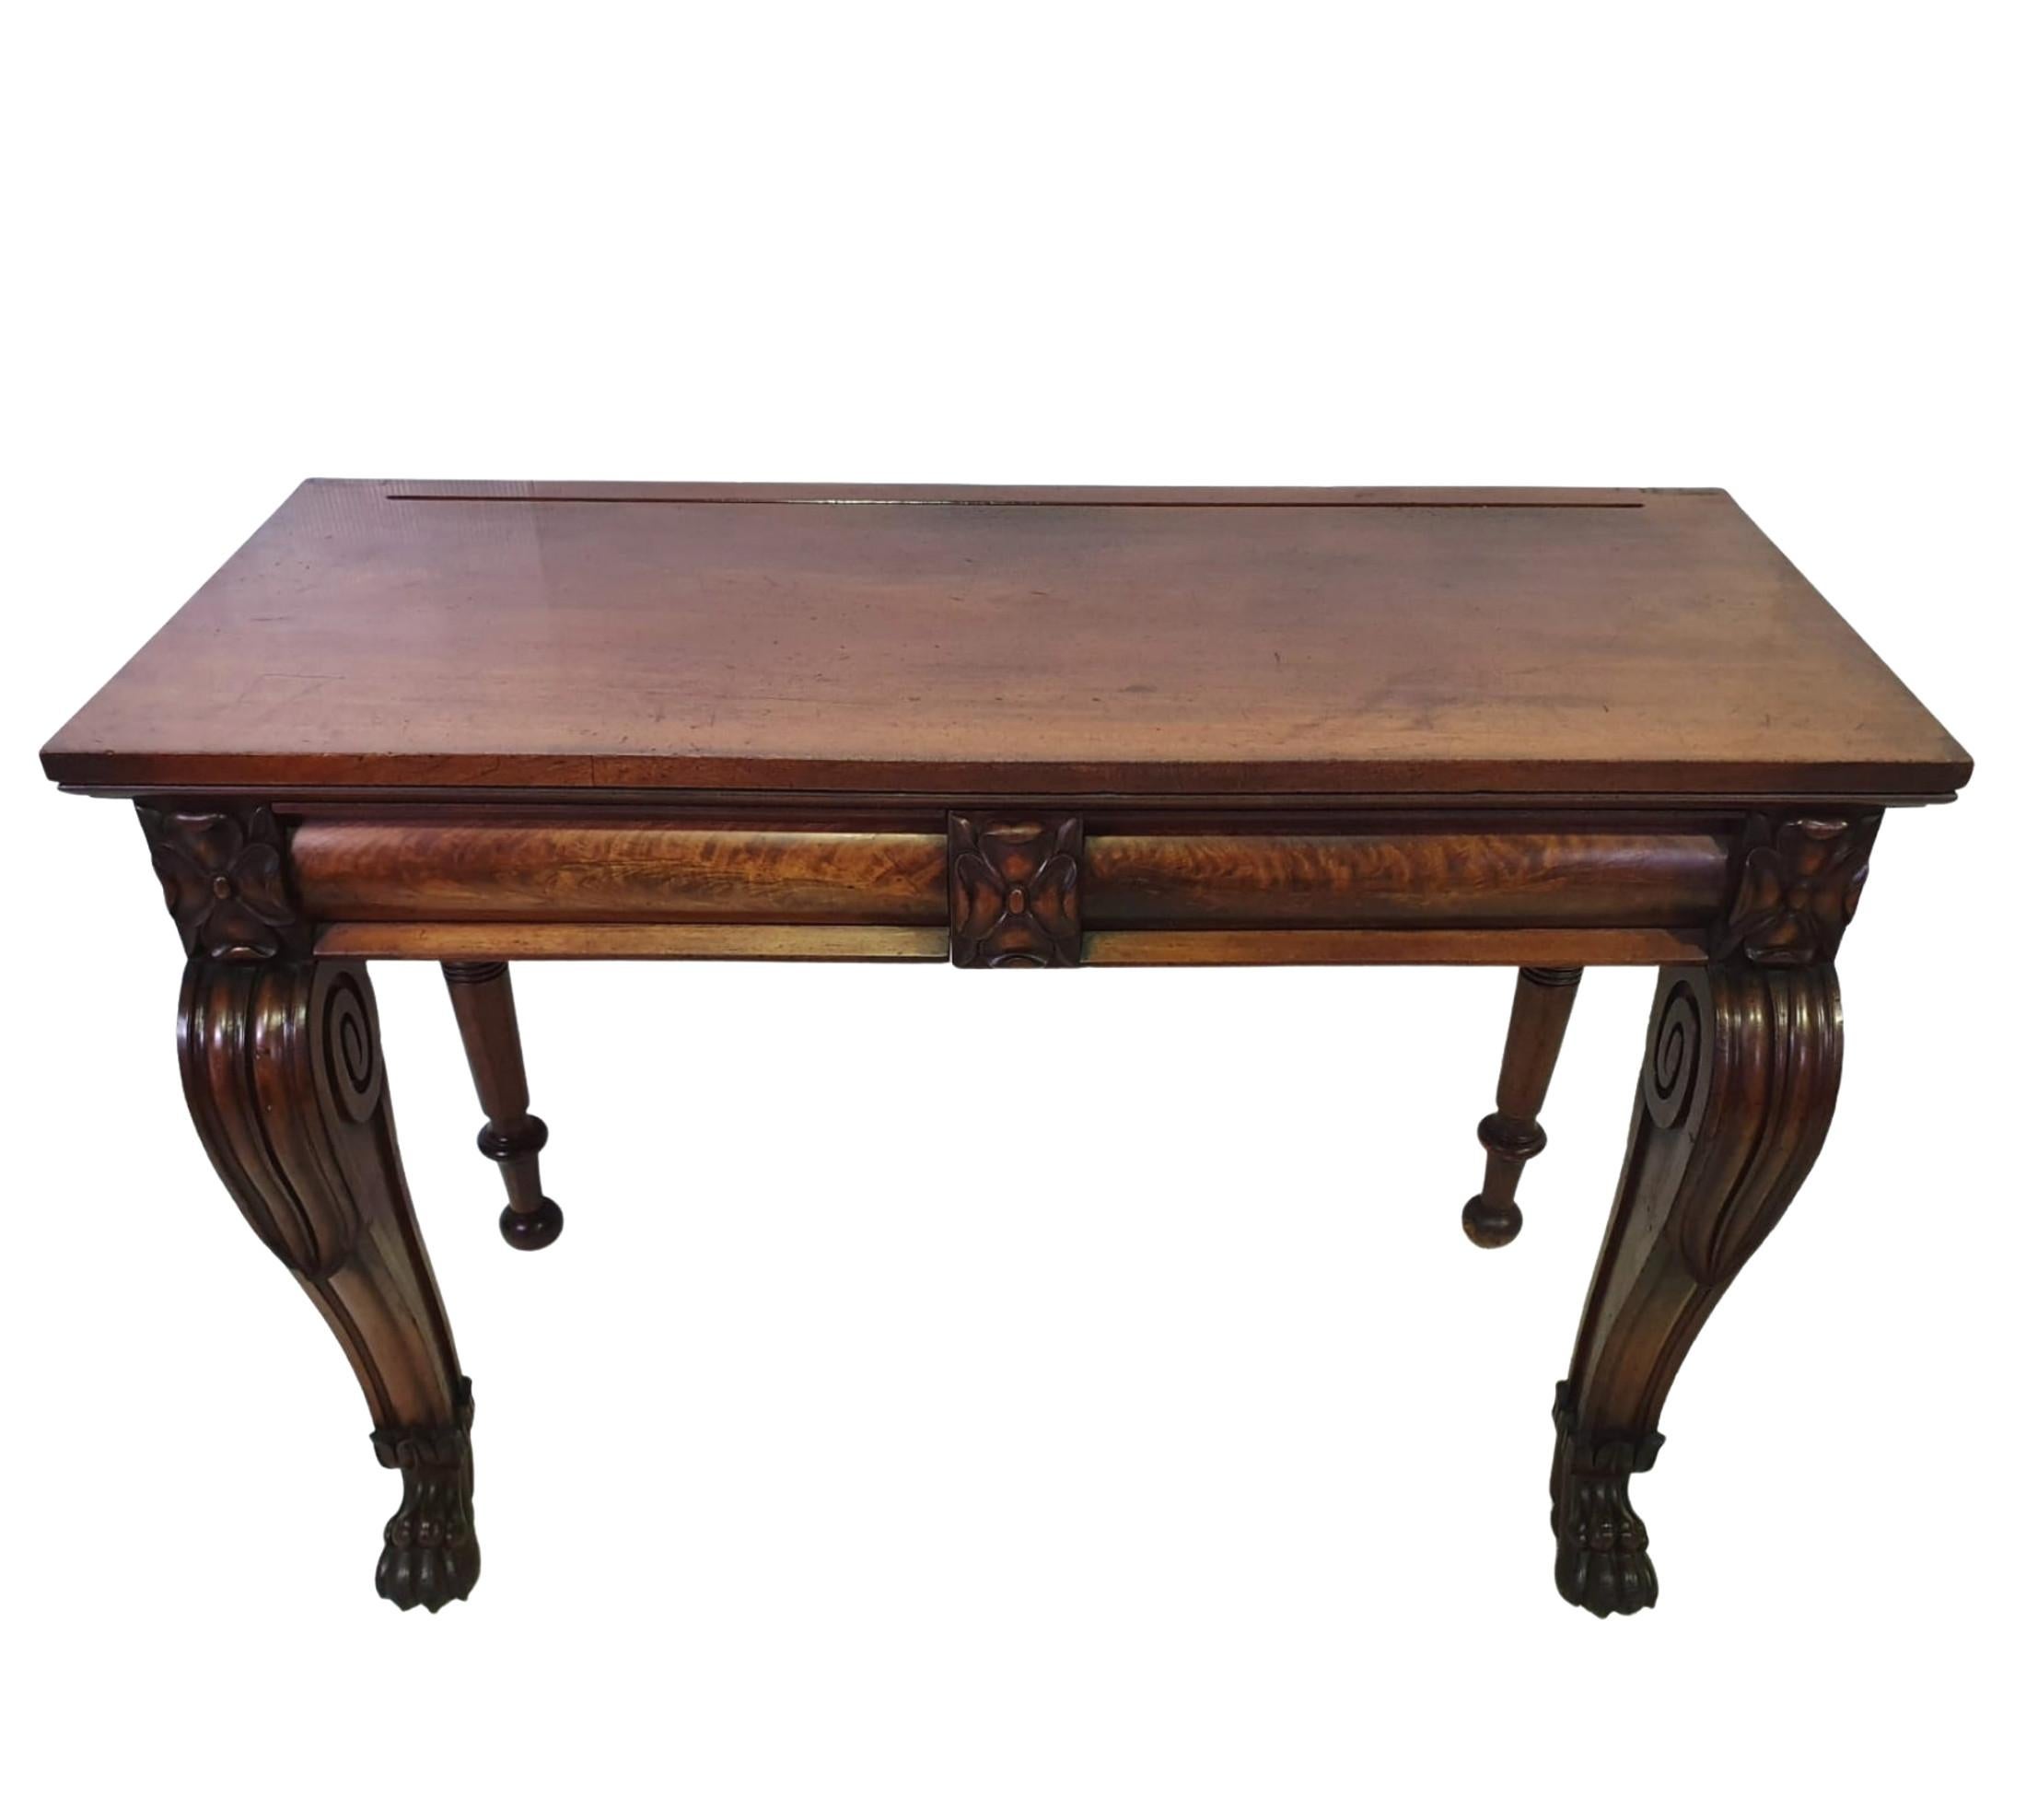 19th century Irish William IV mahogany console or side table. The moulded top raised over frieze with carved flower head motif supported on turned legs to the rear and beautifully carved scroll legs to the fore terminating on lion paw foot.